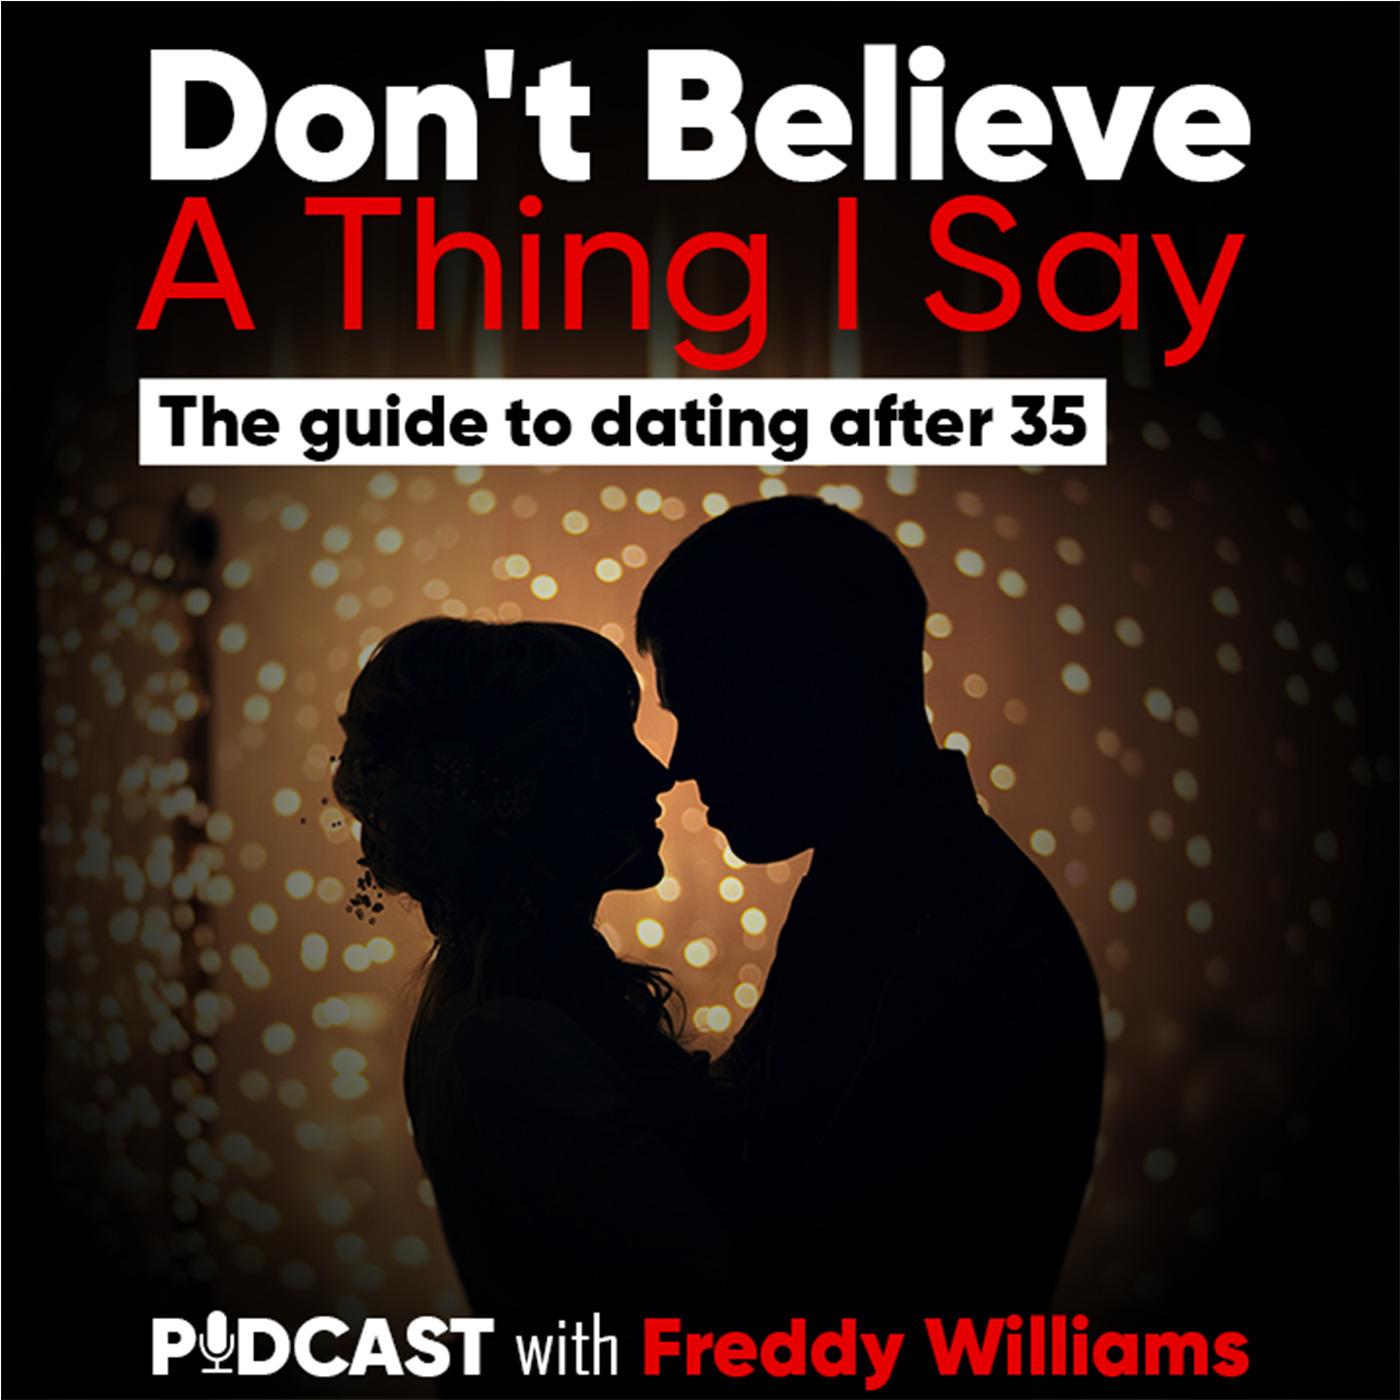 Don’t Believe a Thing I Say: Guide to Dating After 35 — hosted by Freddy Williams